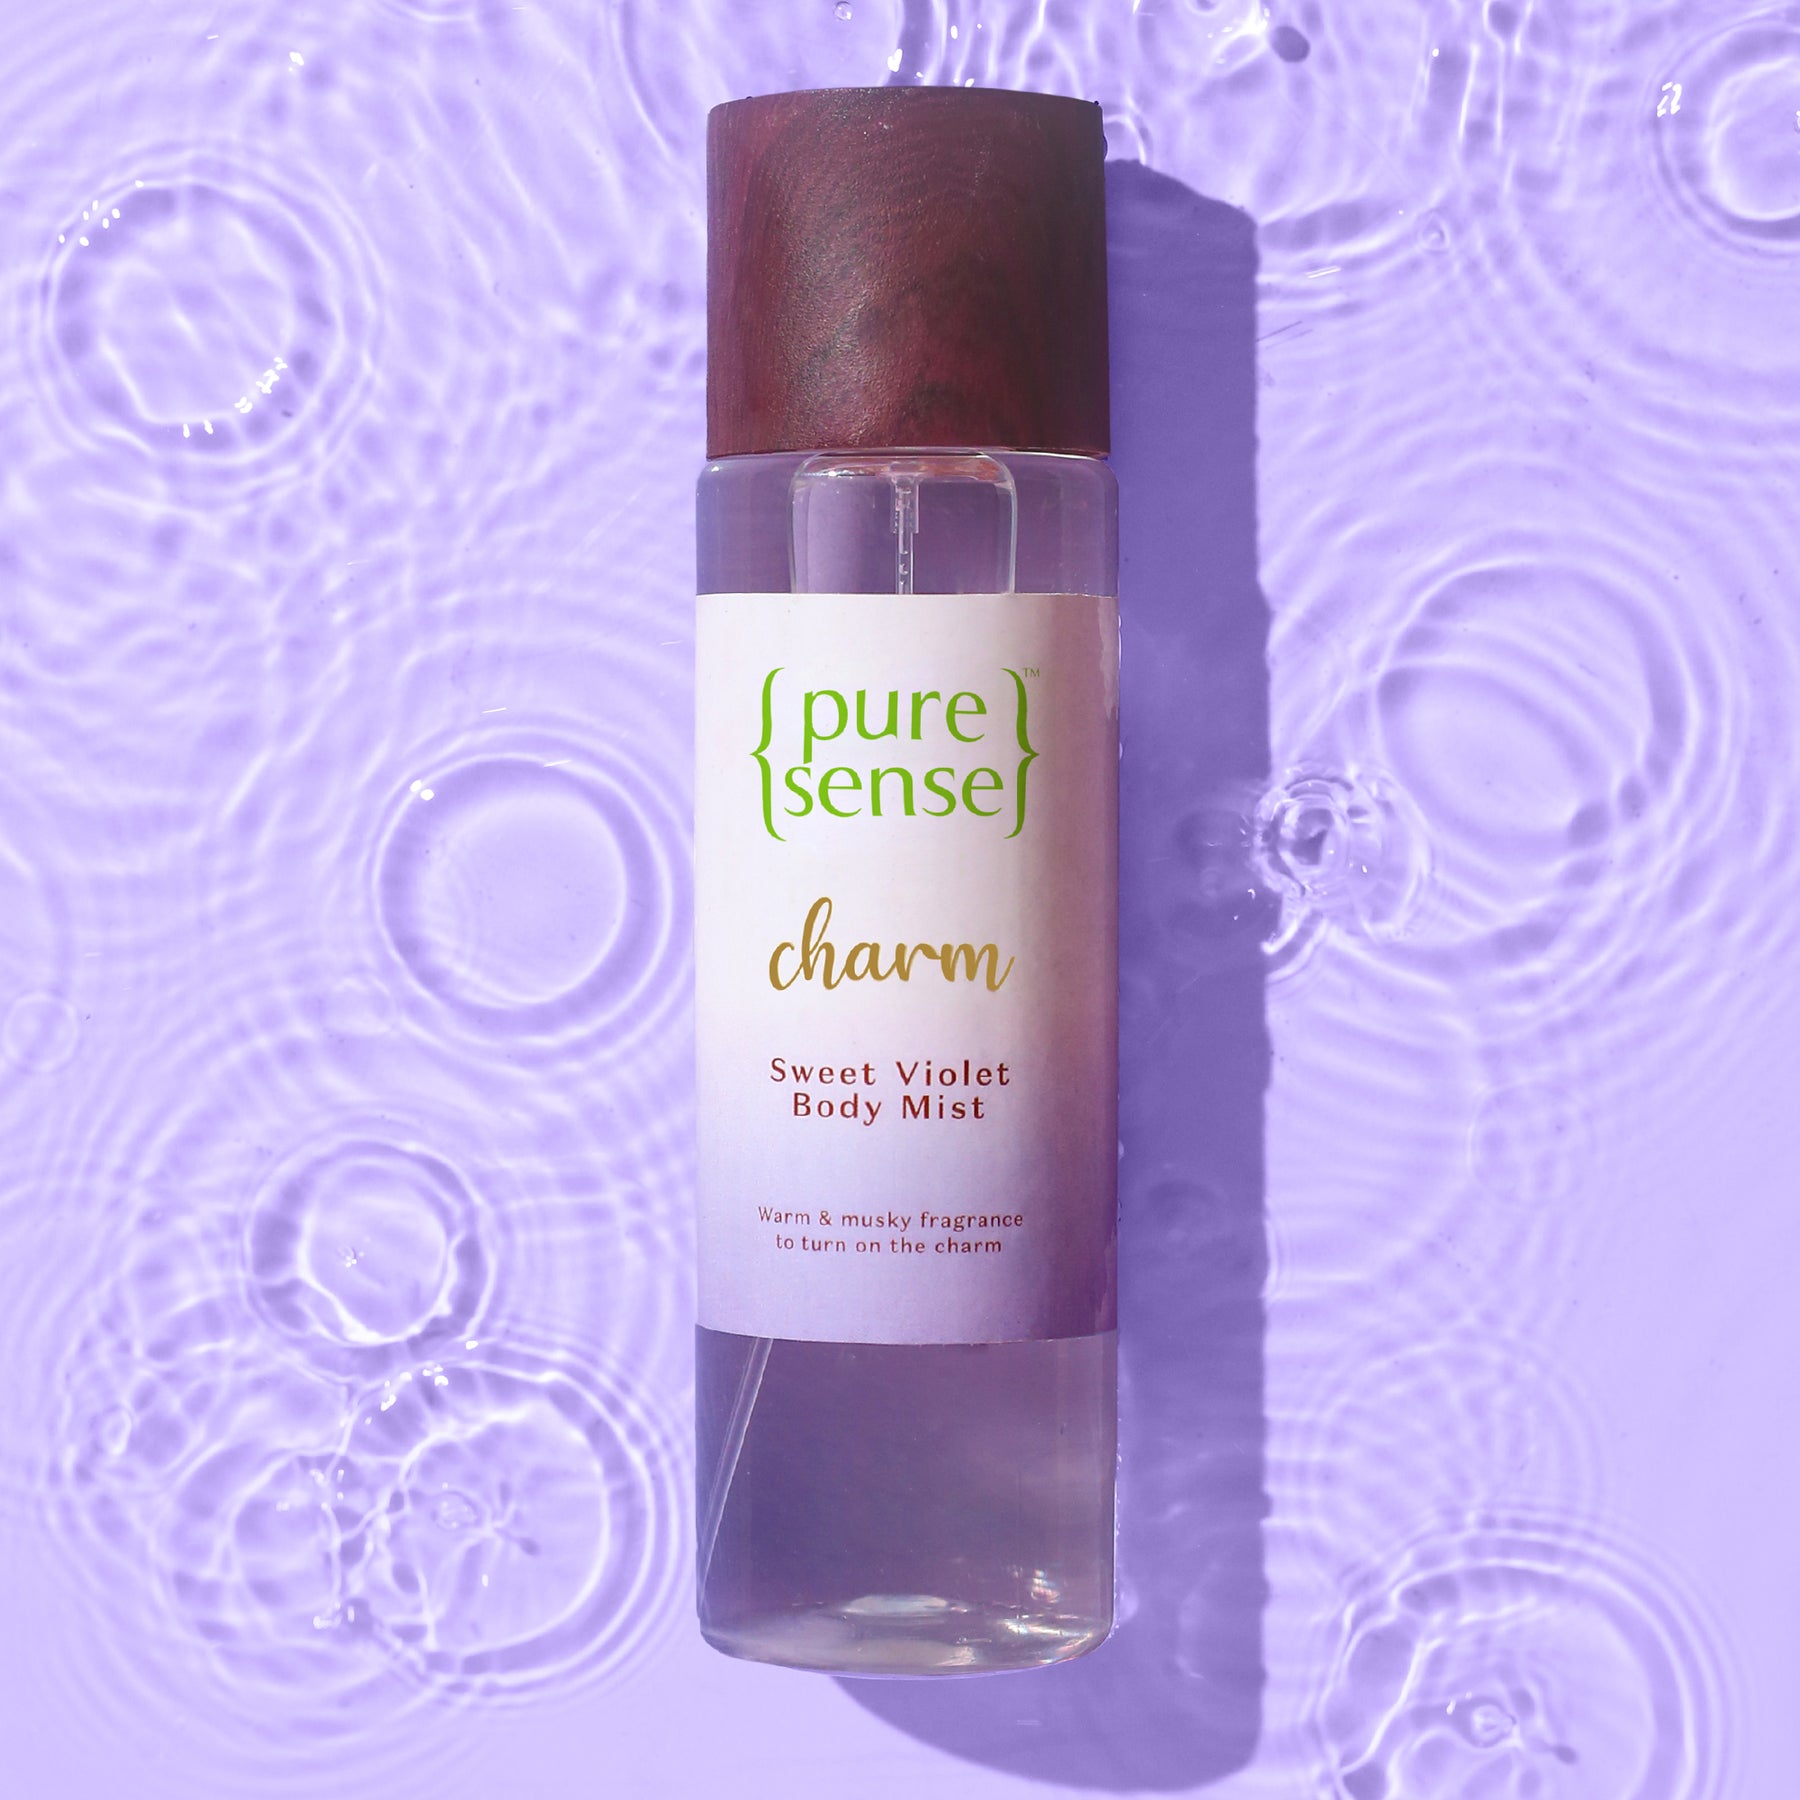 Charm Sweet Violet Body Mist | From the makers of Parachute Advansed | 150ml - PureSense